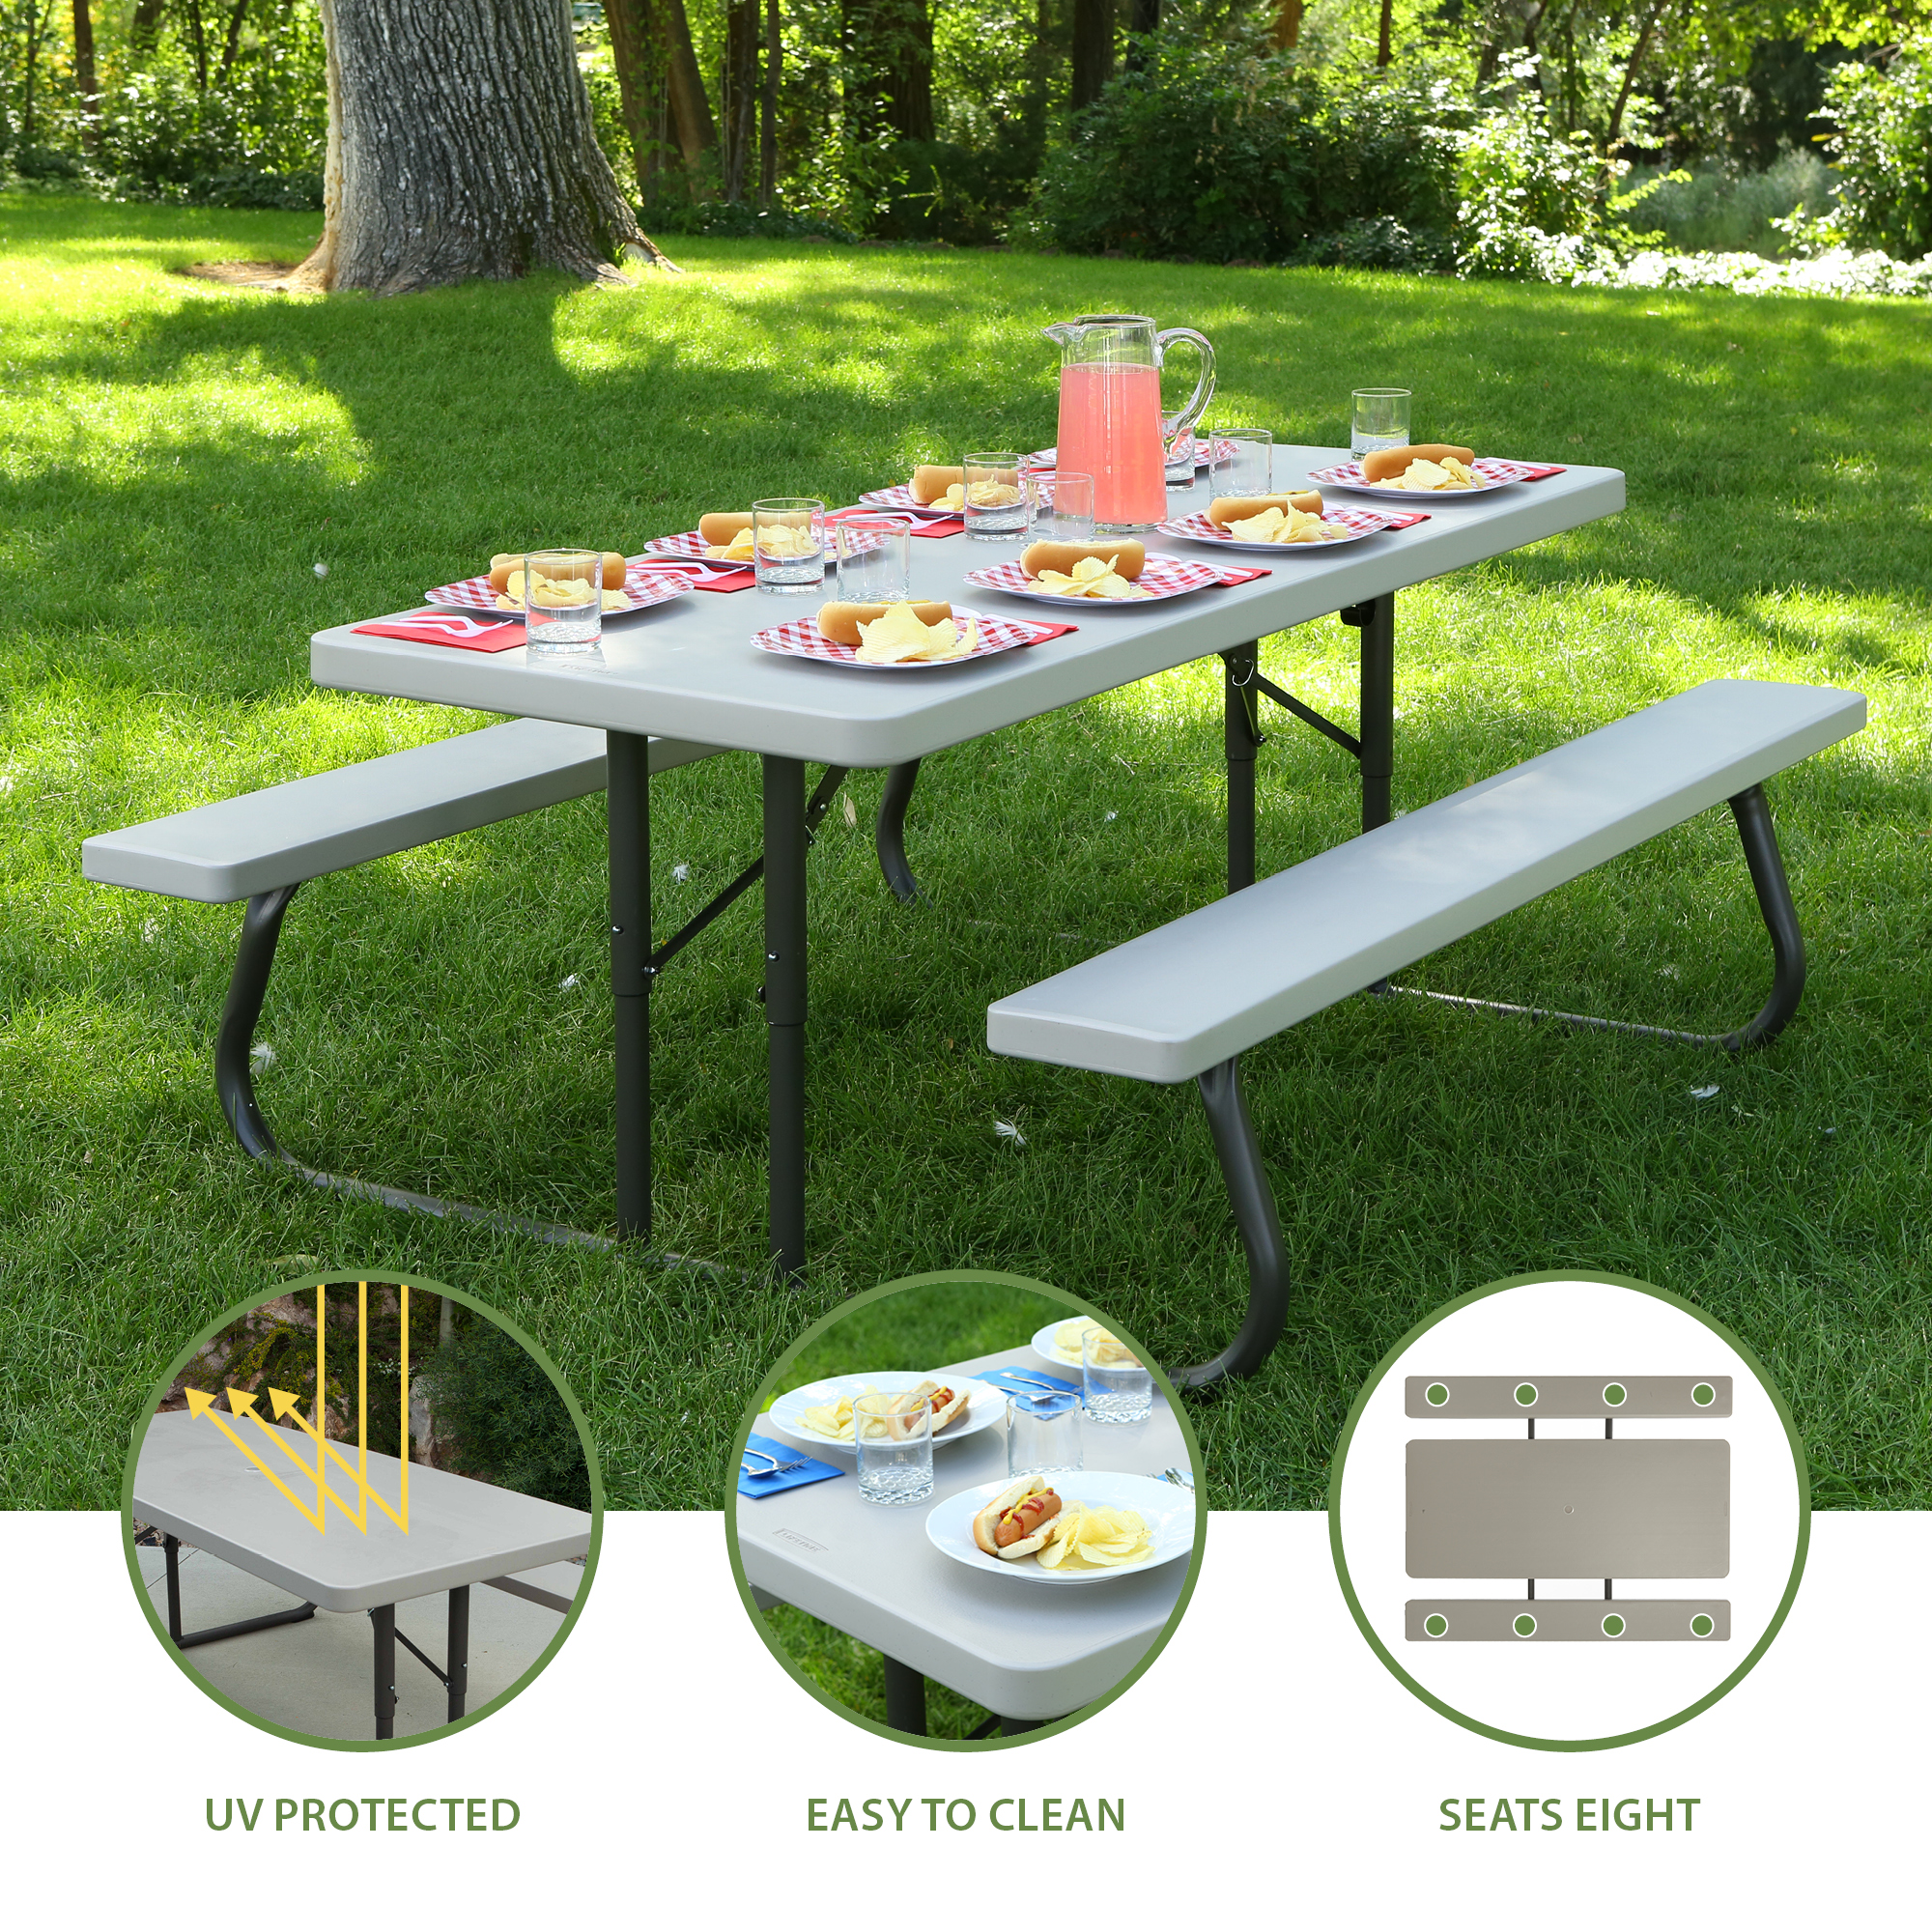 Lifetime 6 Foot Folding Picnic Table, Putty, 22119 - image 5 of 12